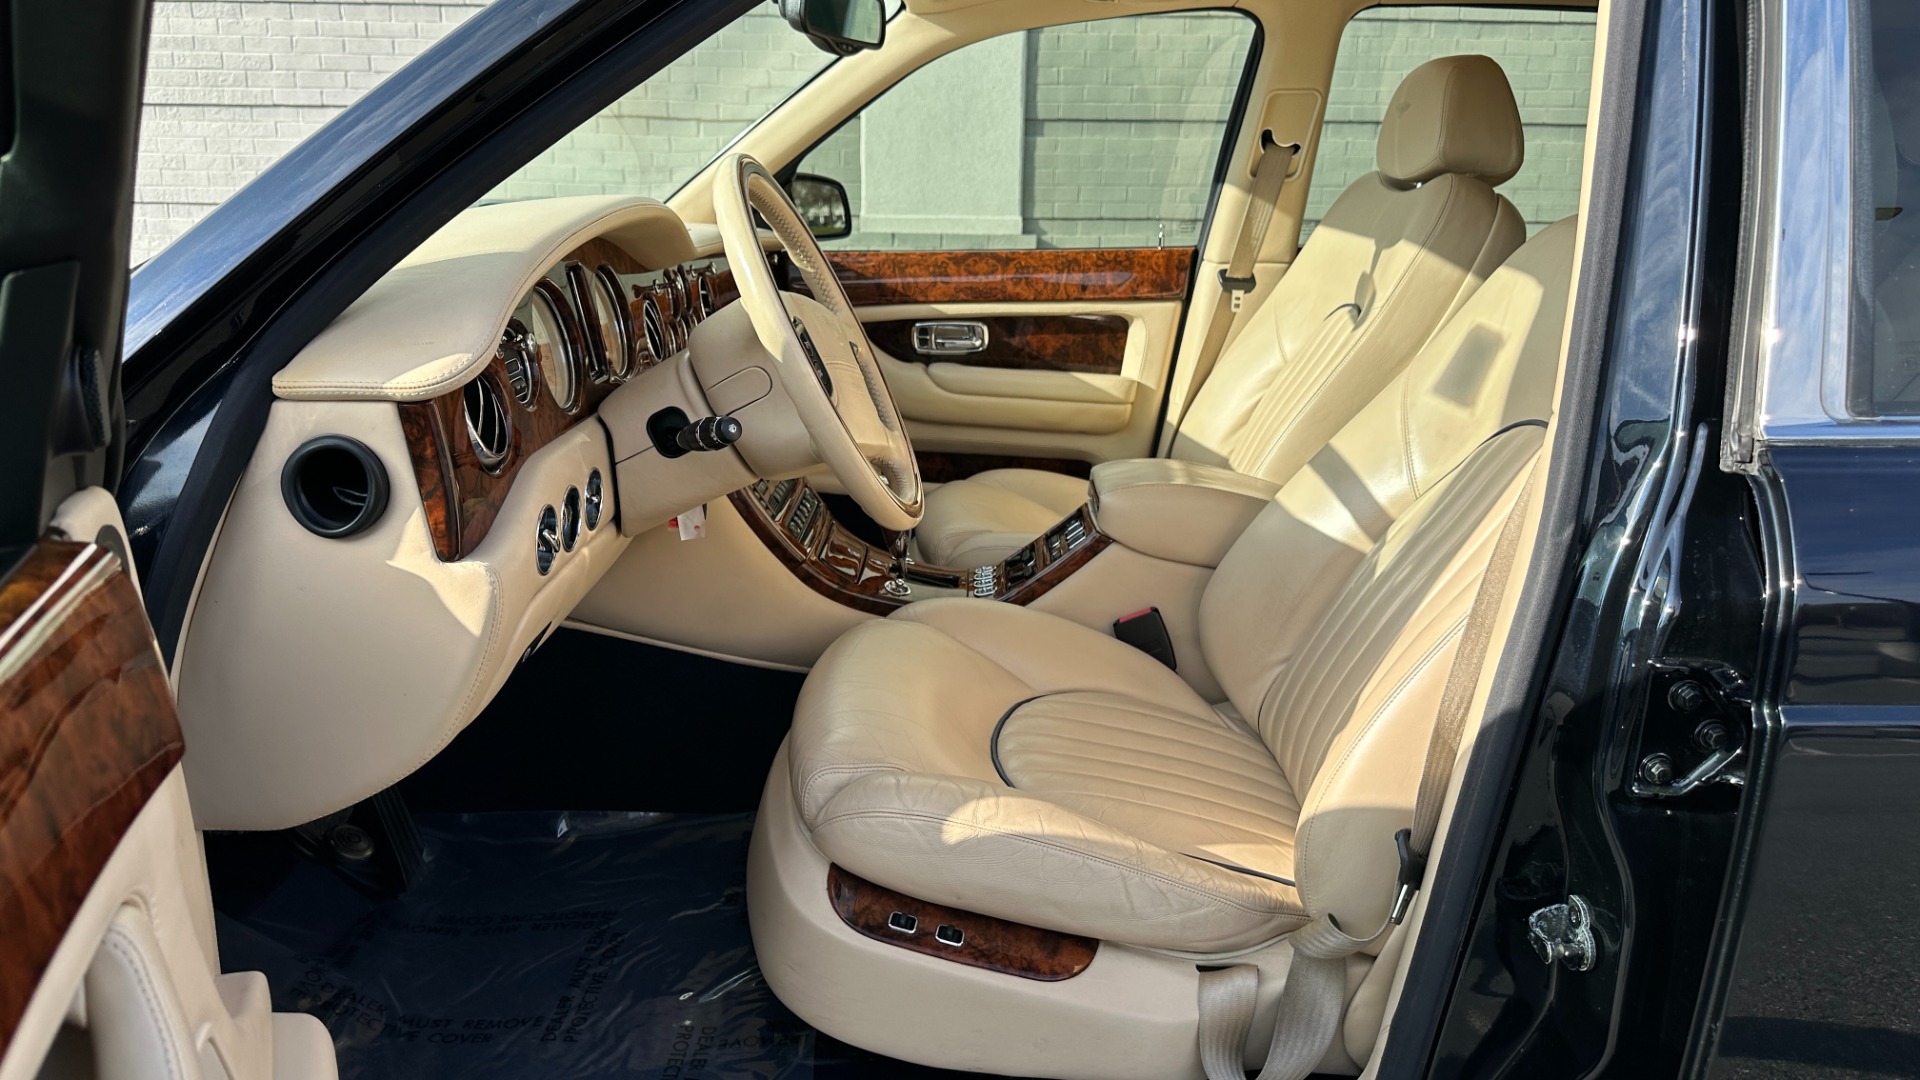 Used 2001 Bentley ARNAGE RED LABEL 6.75L V8 / TURBO / FULL LEATHER / WOOD TRIM / HEATED SEATS / SUNR for sale Sold at Formula Imports in Charlotte NC 28227 10